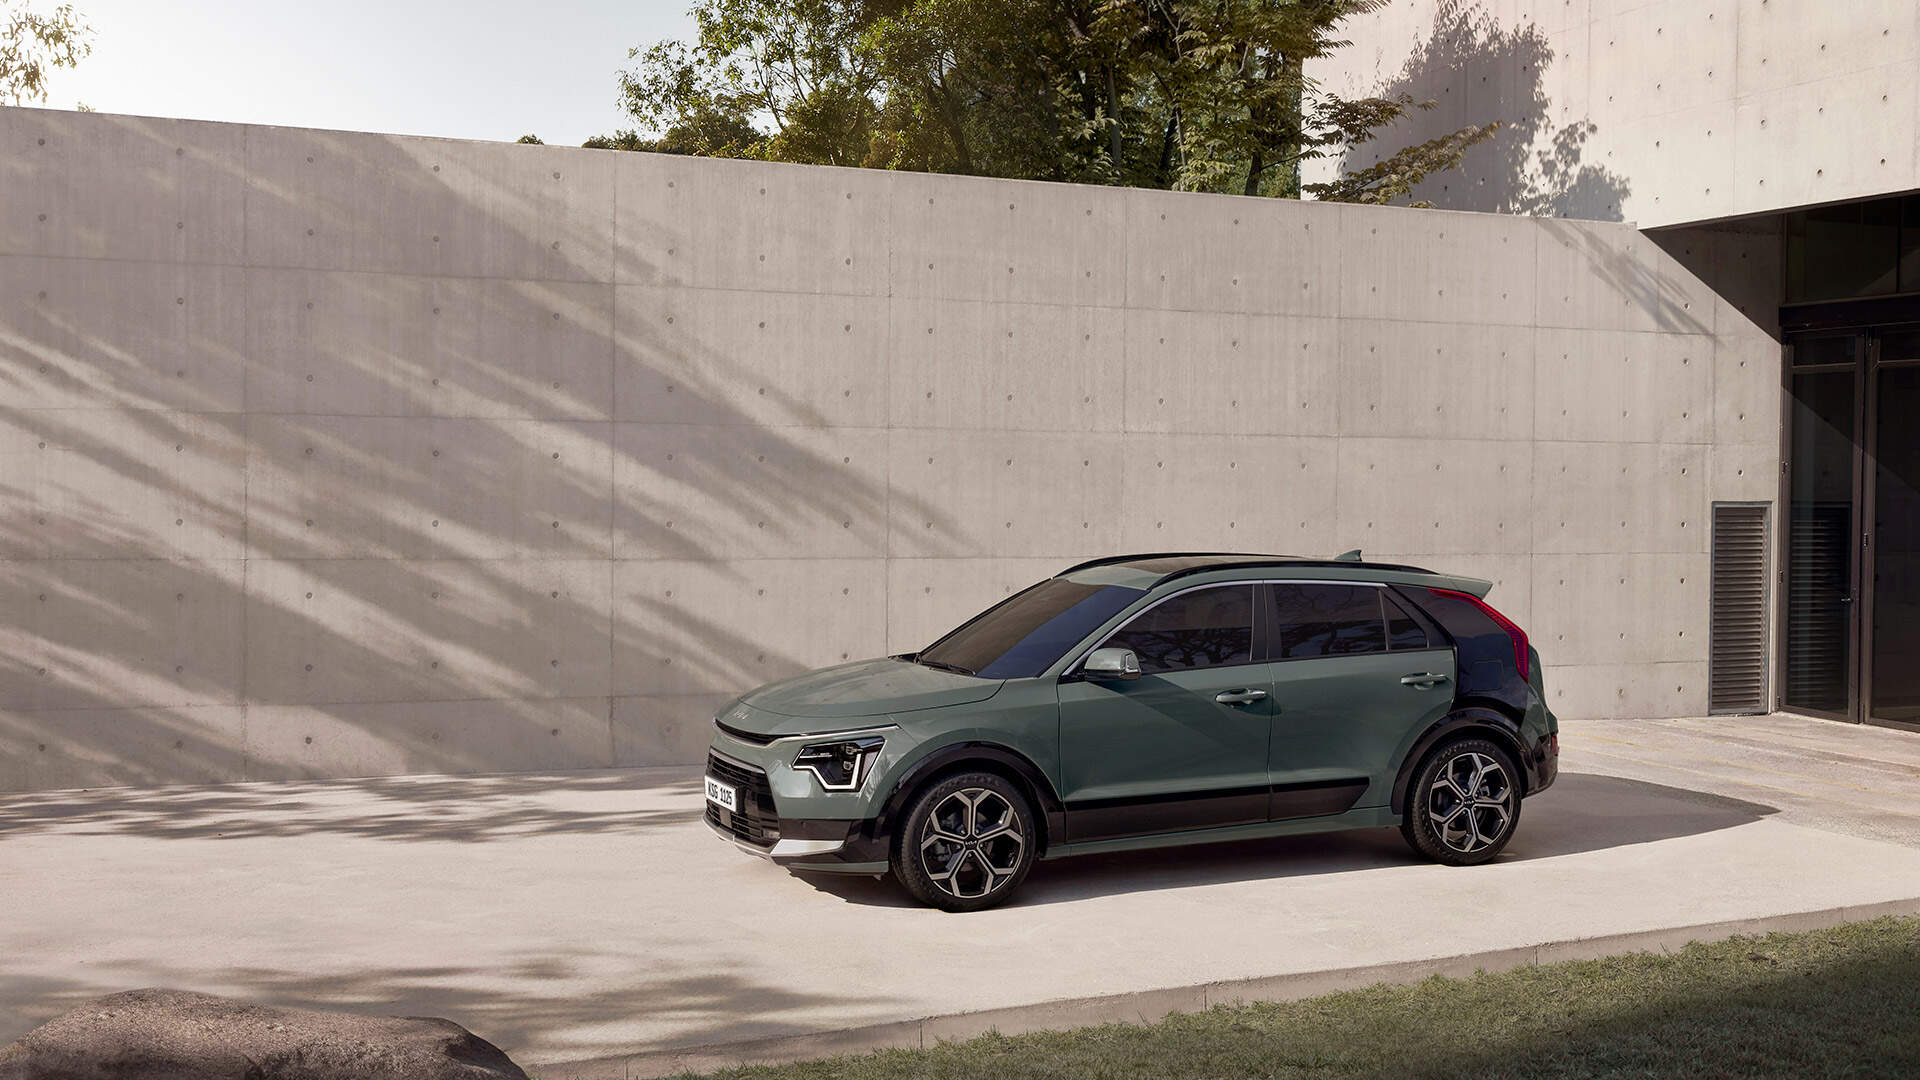 A Kia Niro is parked in front of a concrete wall